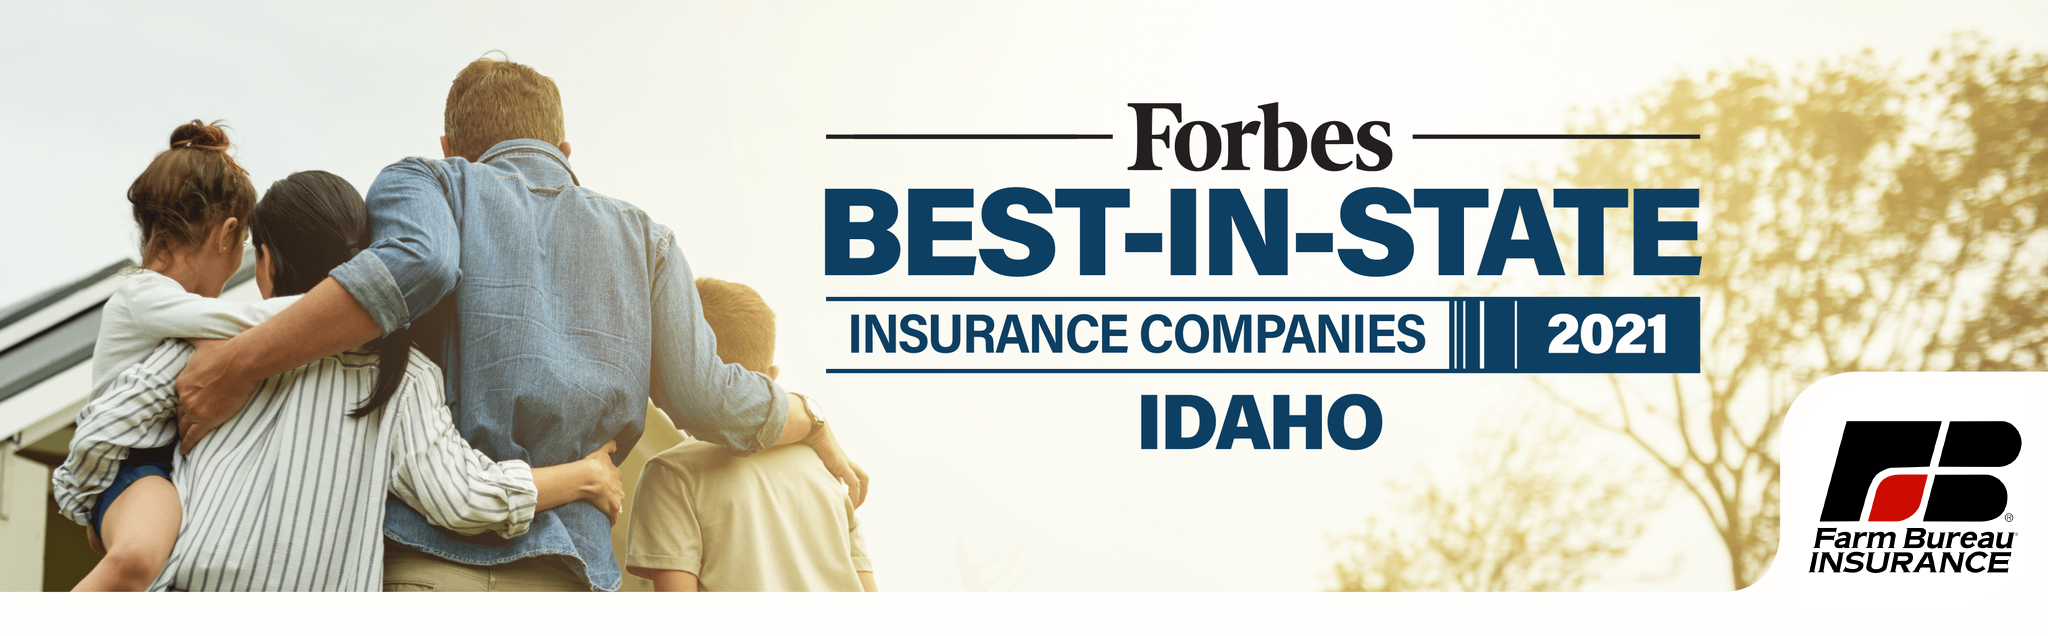 Forbes best in state banner ad